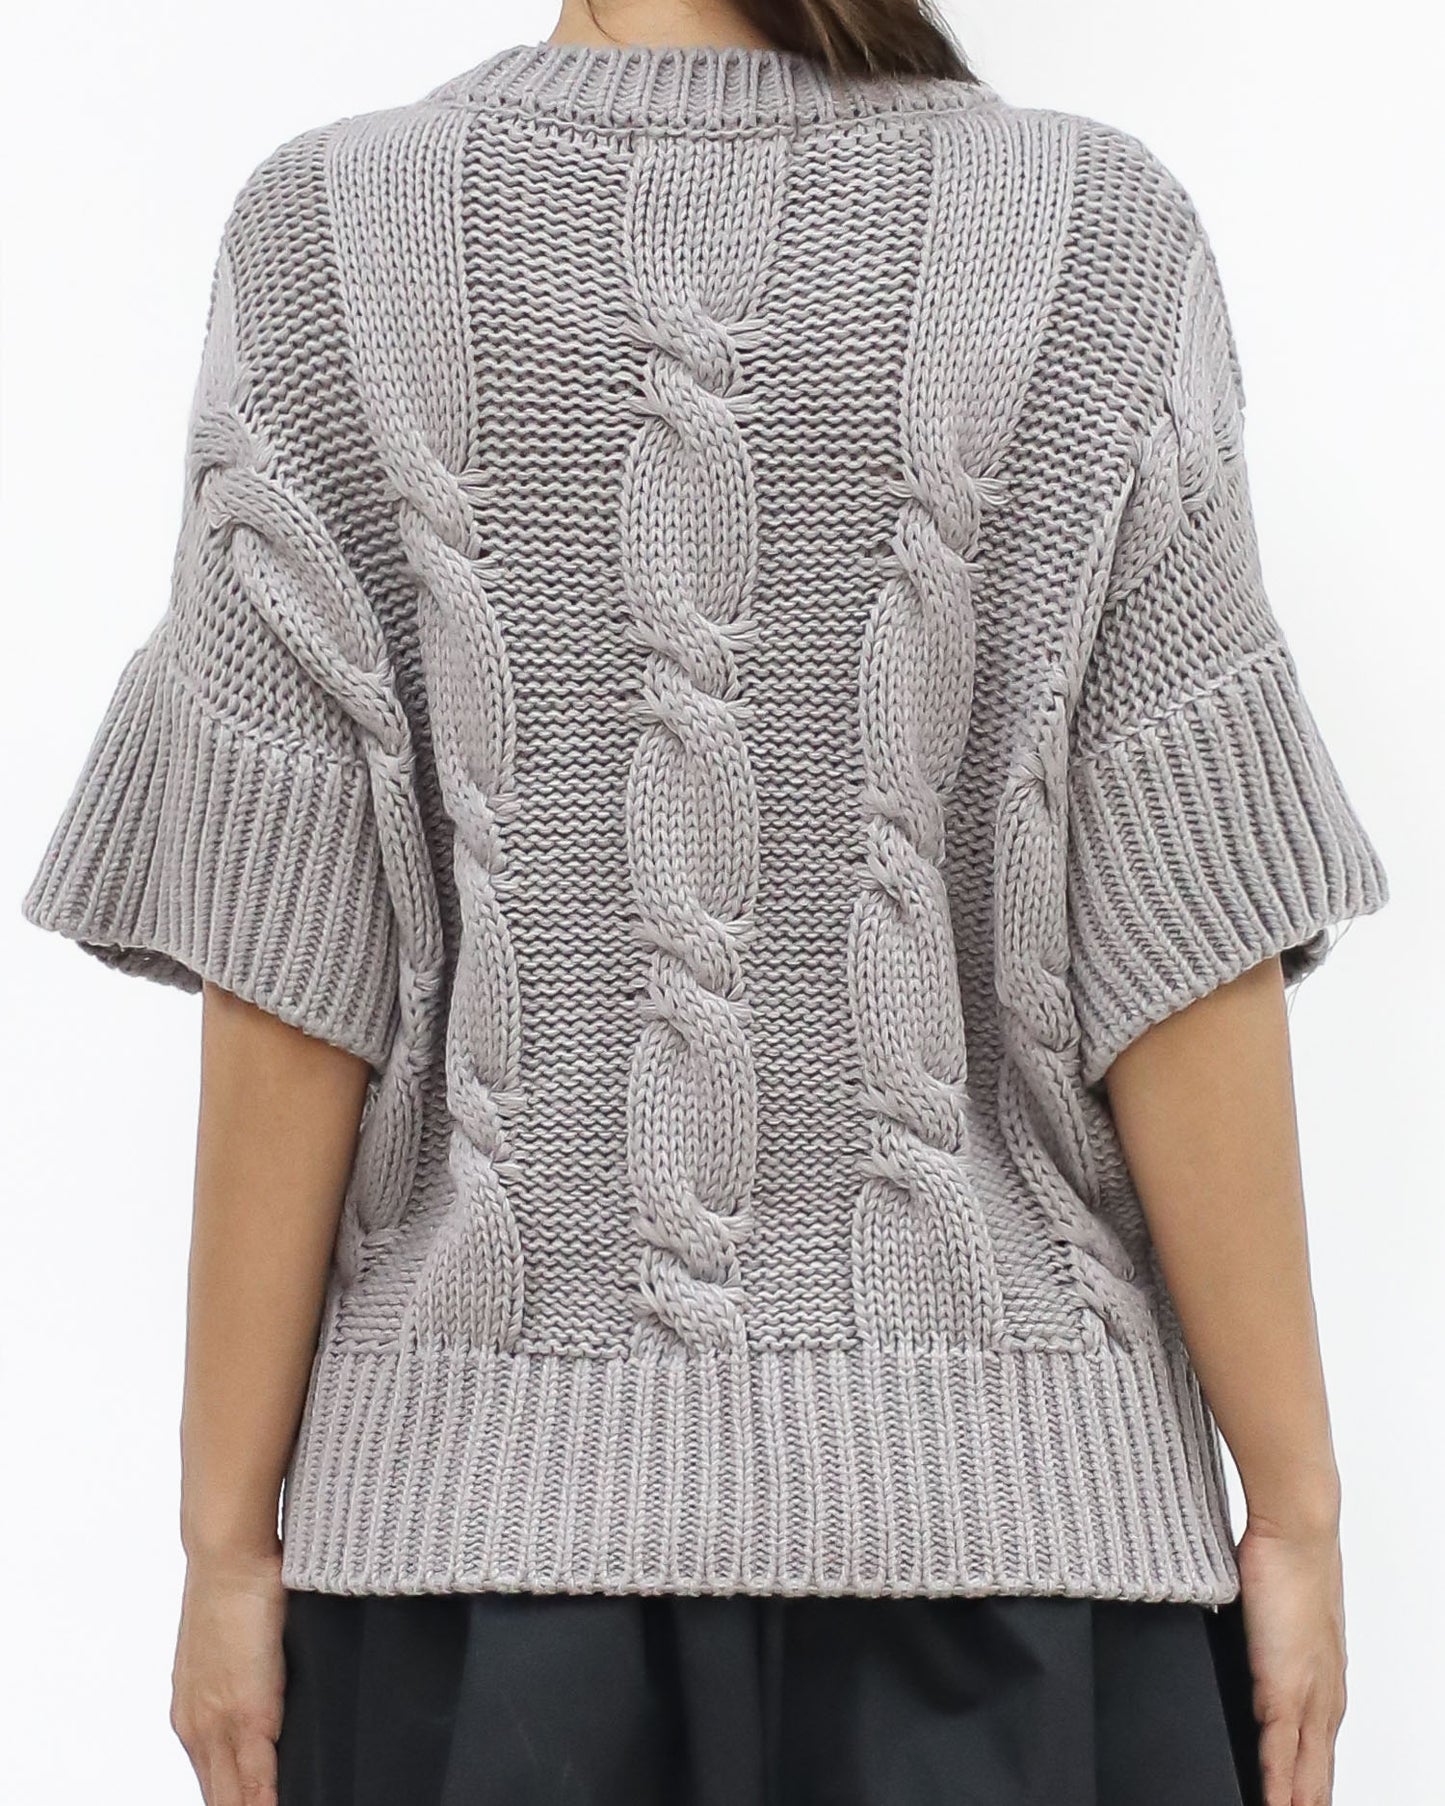 grey twisted knitted top